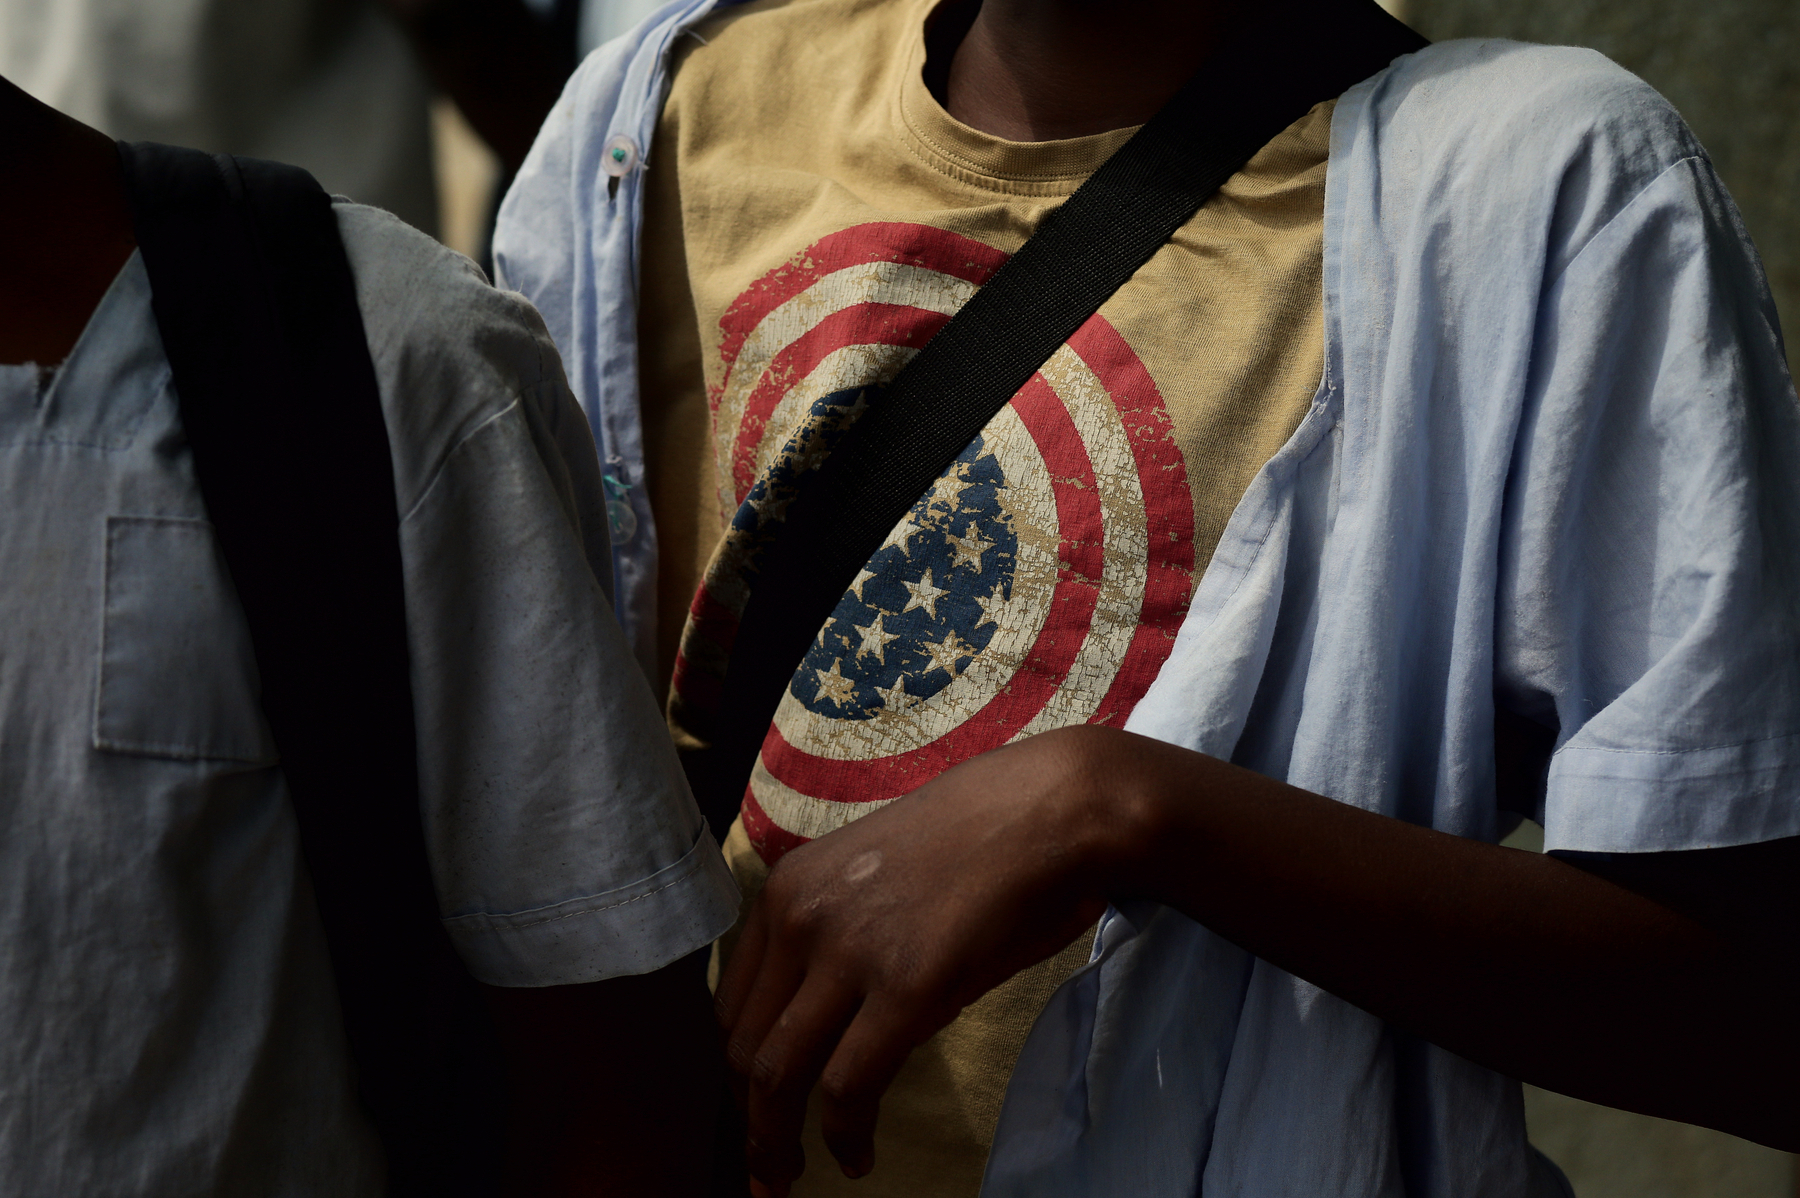 A school boy wearing a battered t-shirt with an American flag printed on it.